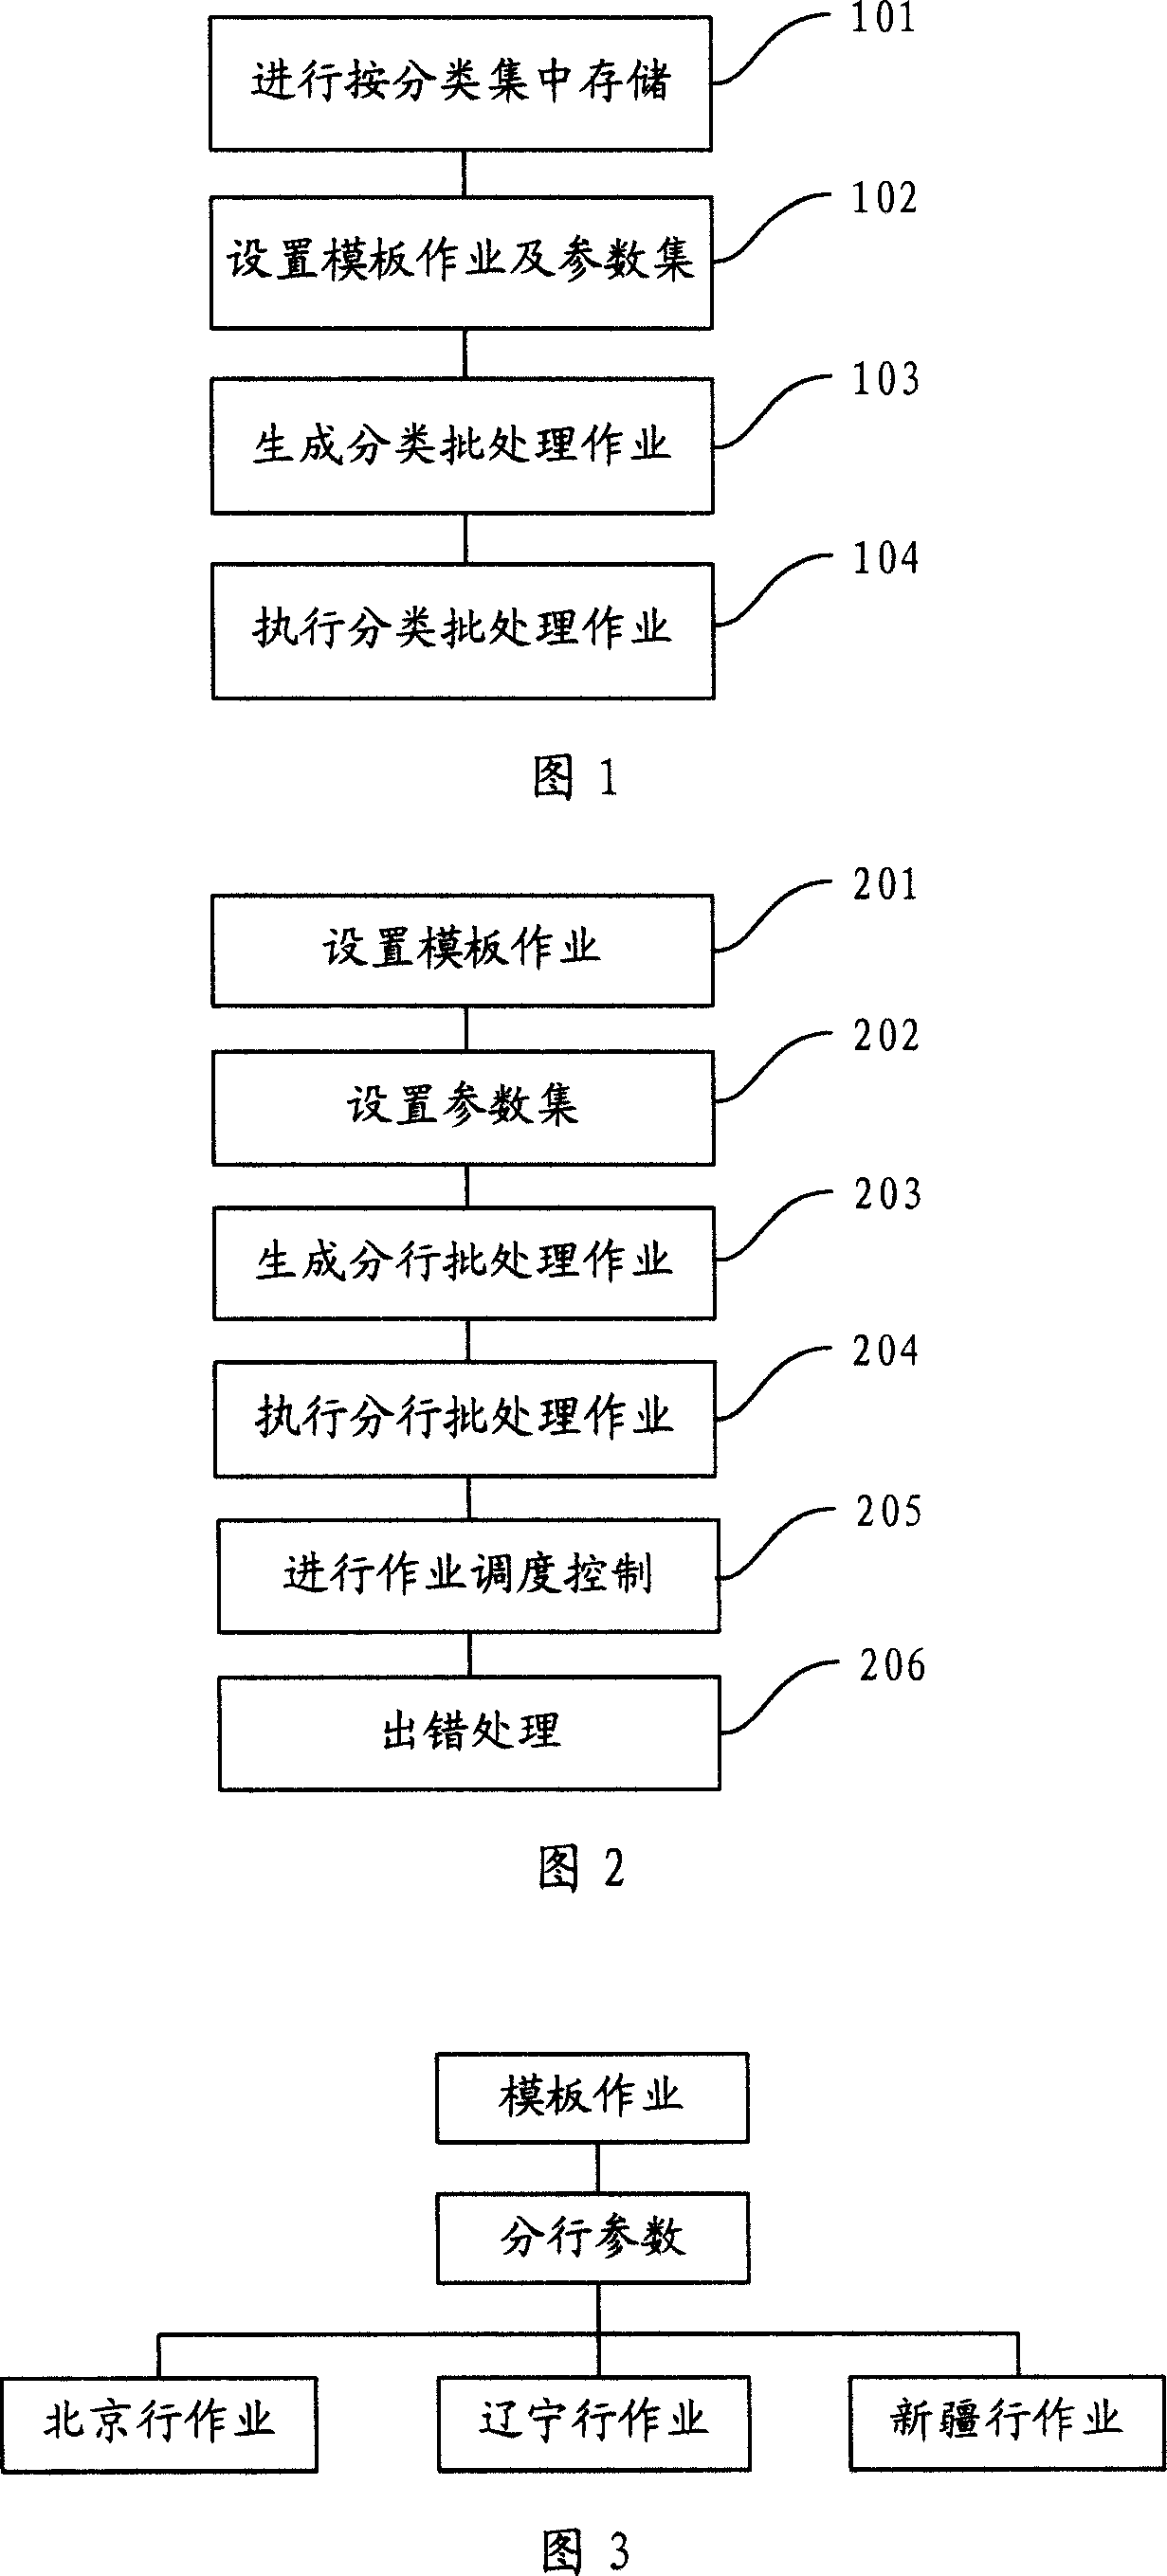 Method and device for categorical data batch processing